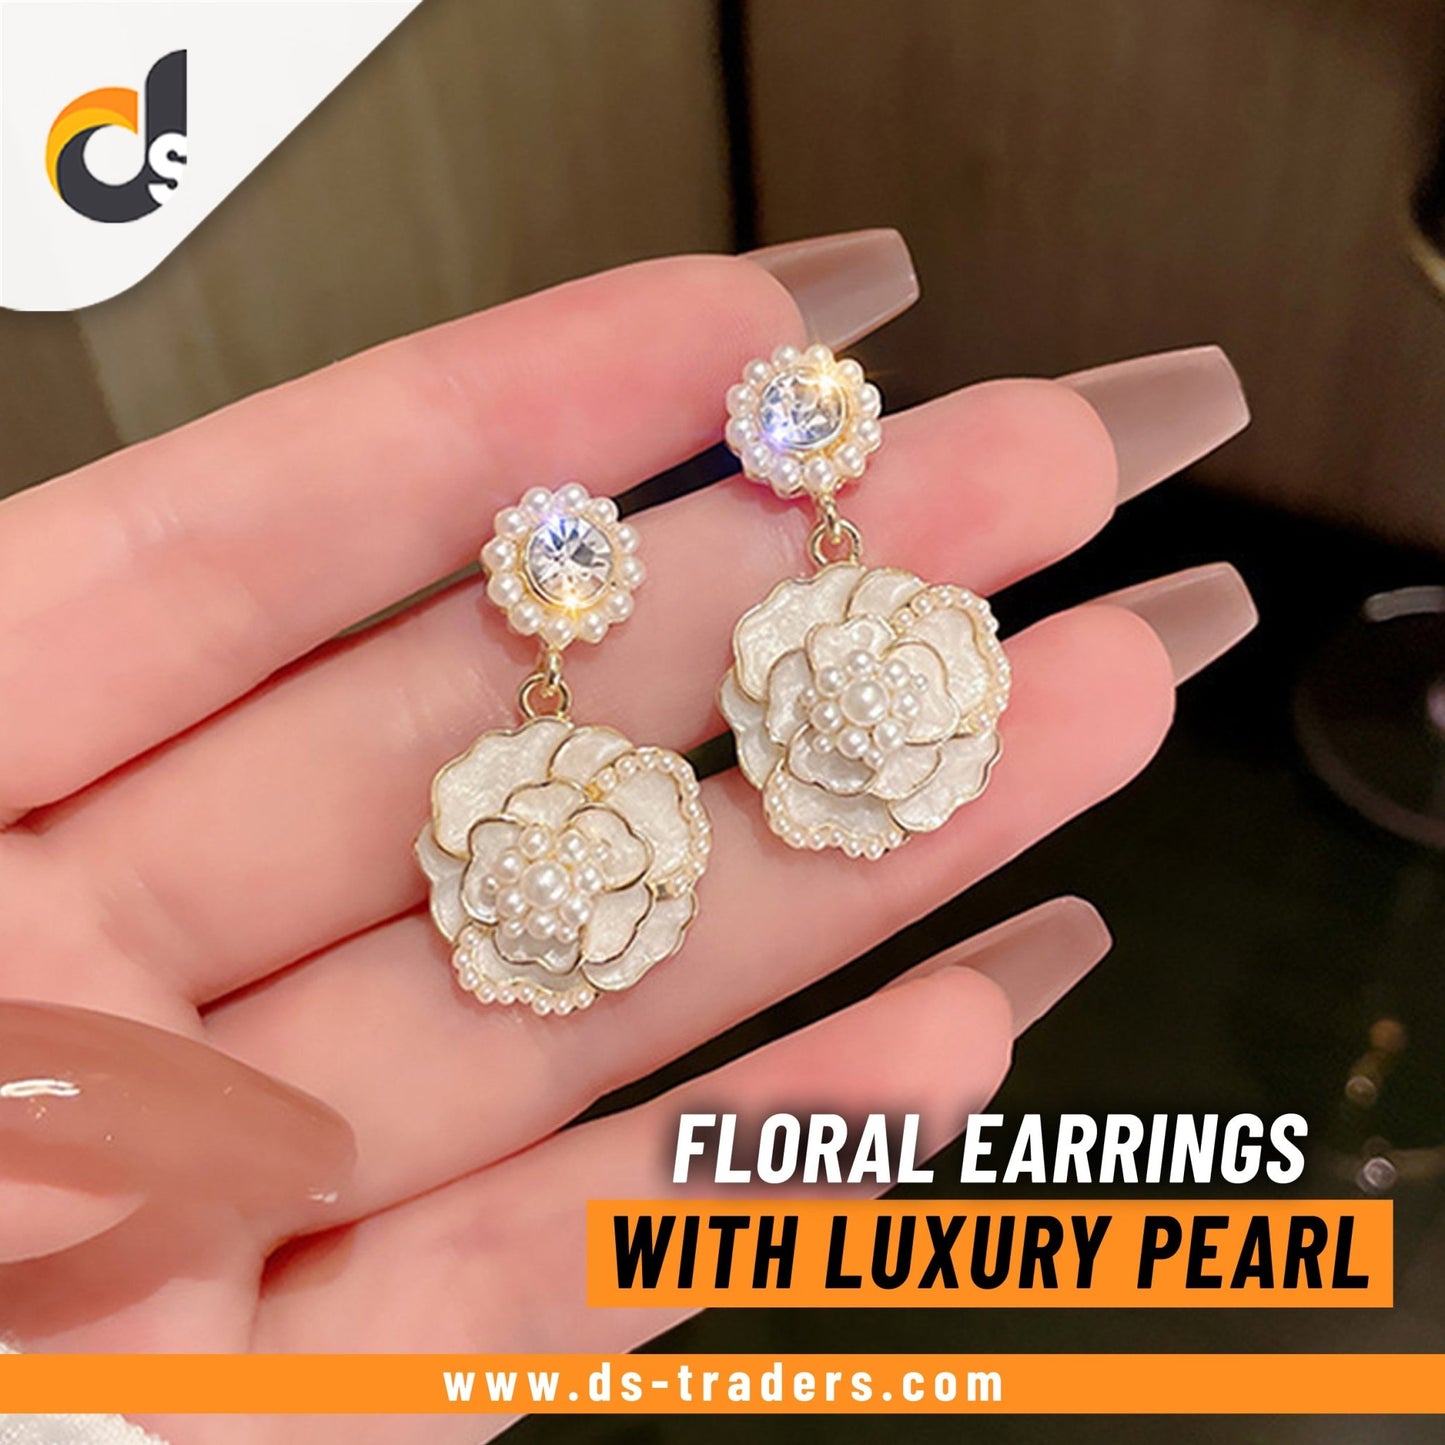 Floral Earrings with Luxury Pearl - DS Traders